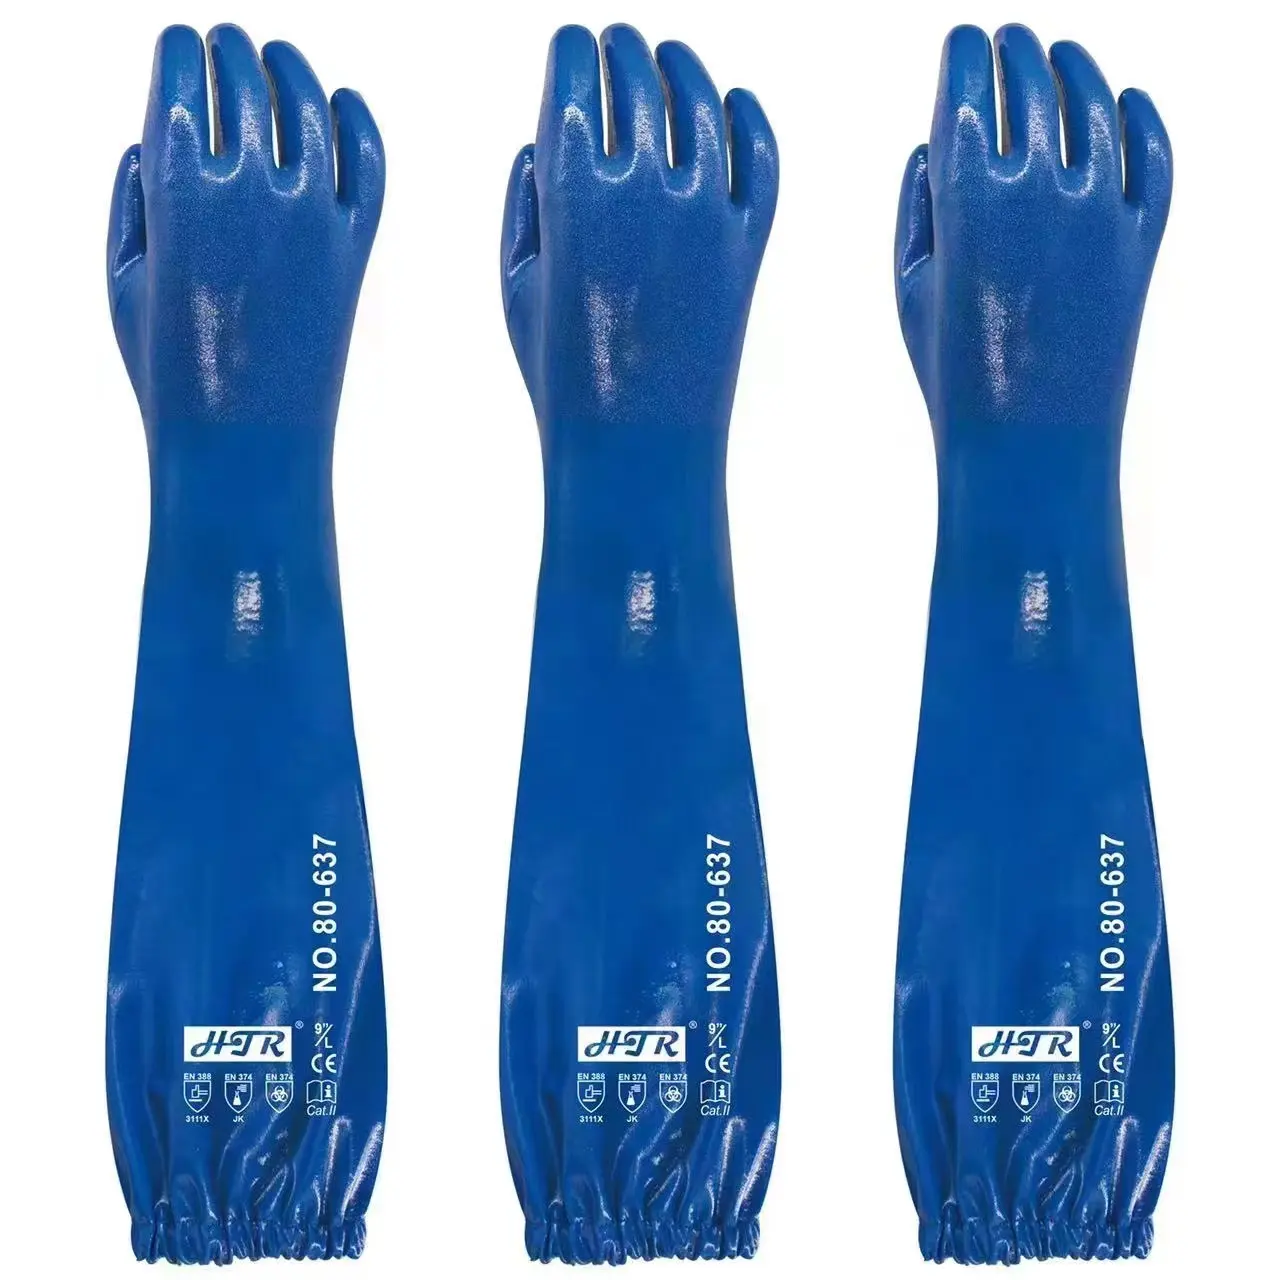 HTR High Quality Nitrile Safety Sleeve Water Resistant Chemical Resistant Gloves For Fishery And Manufacture Industry